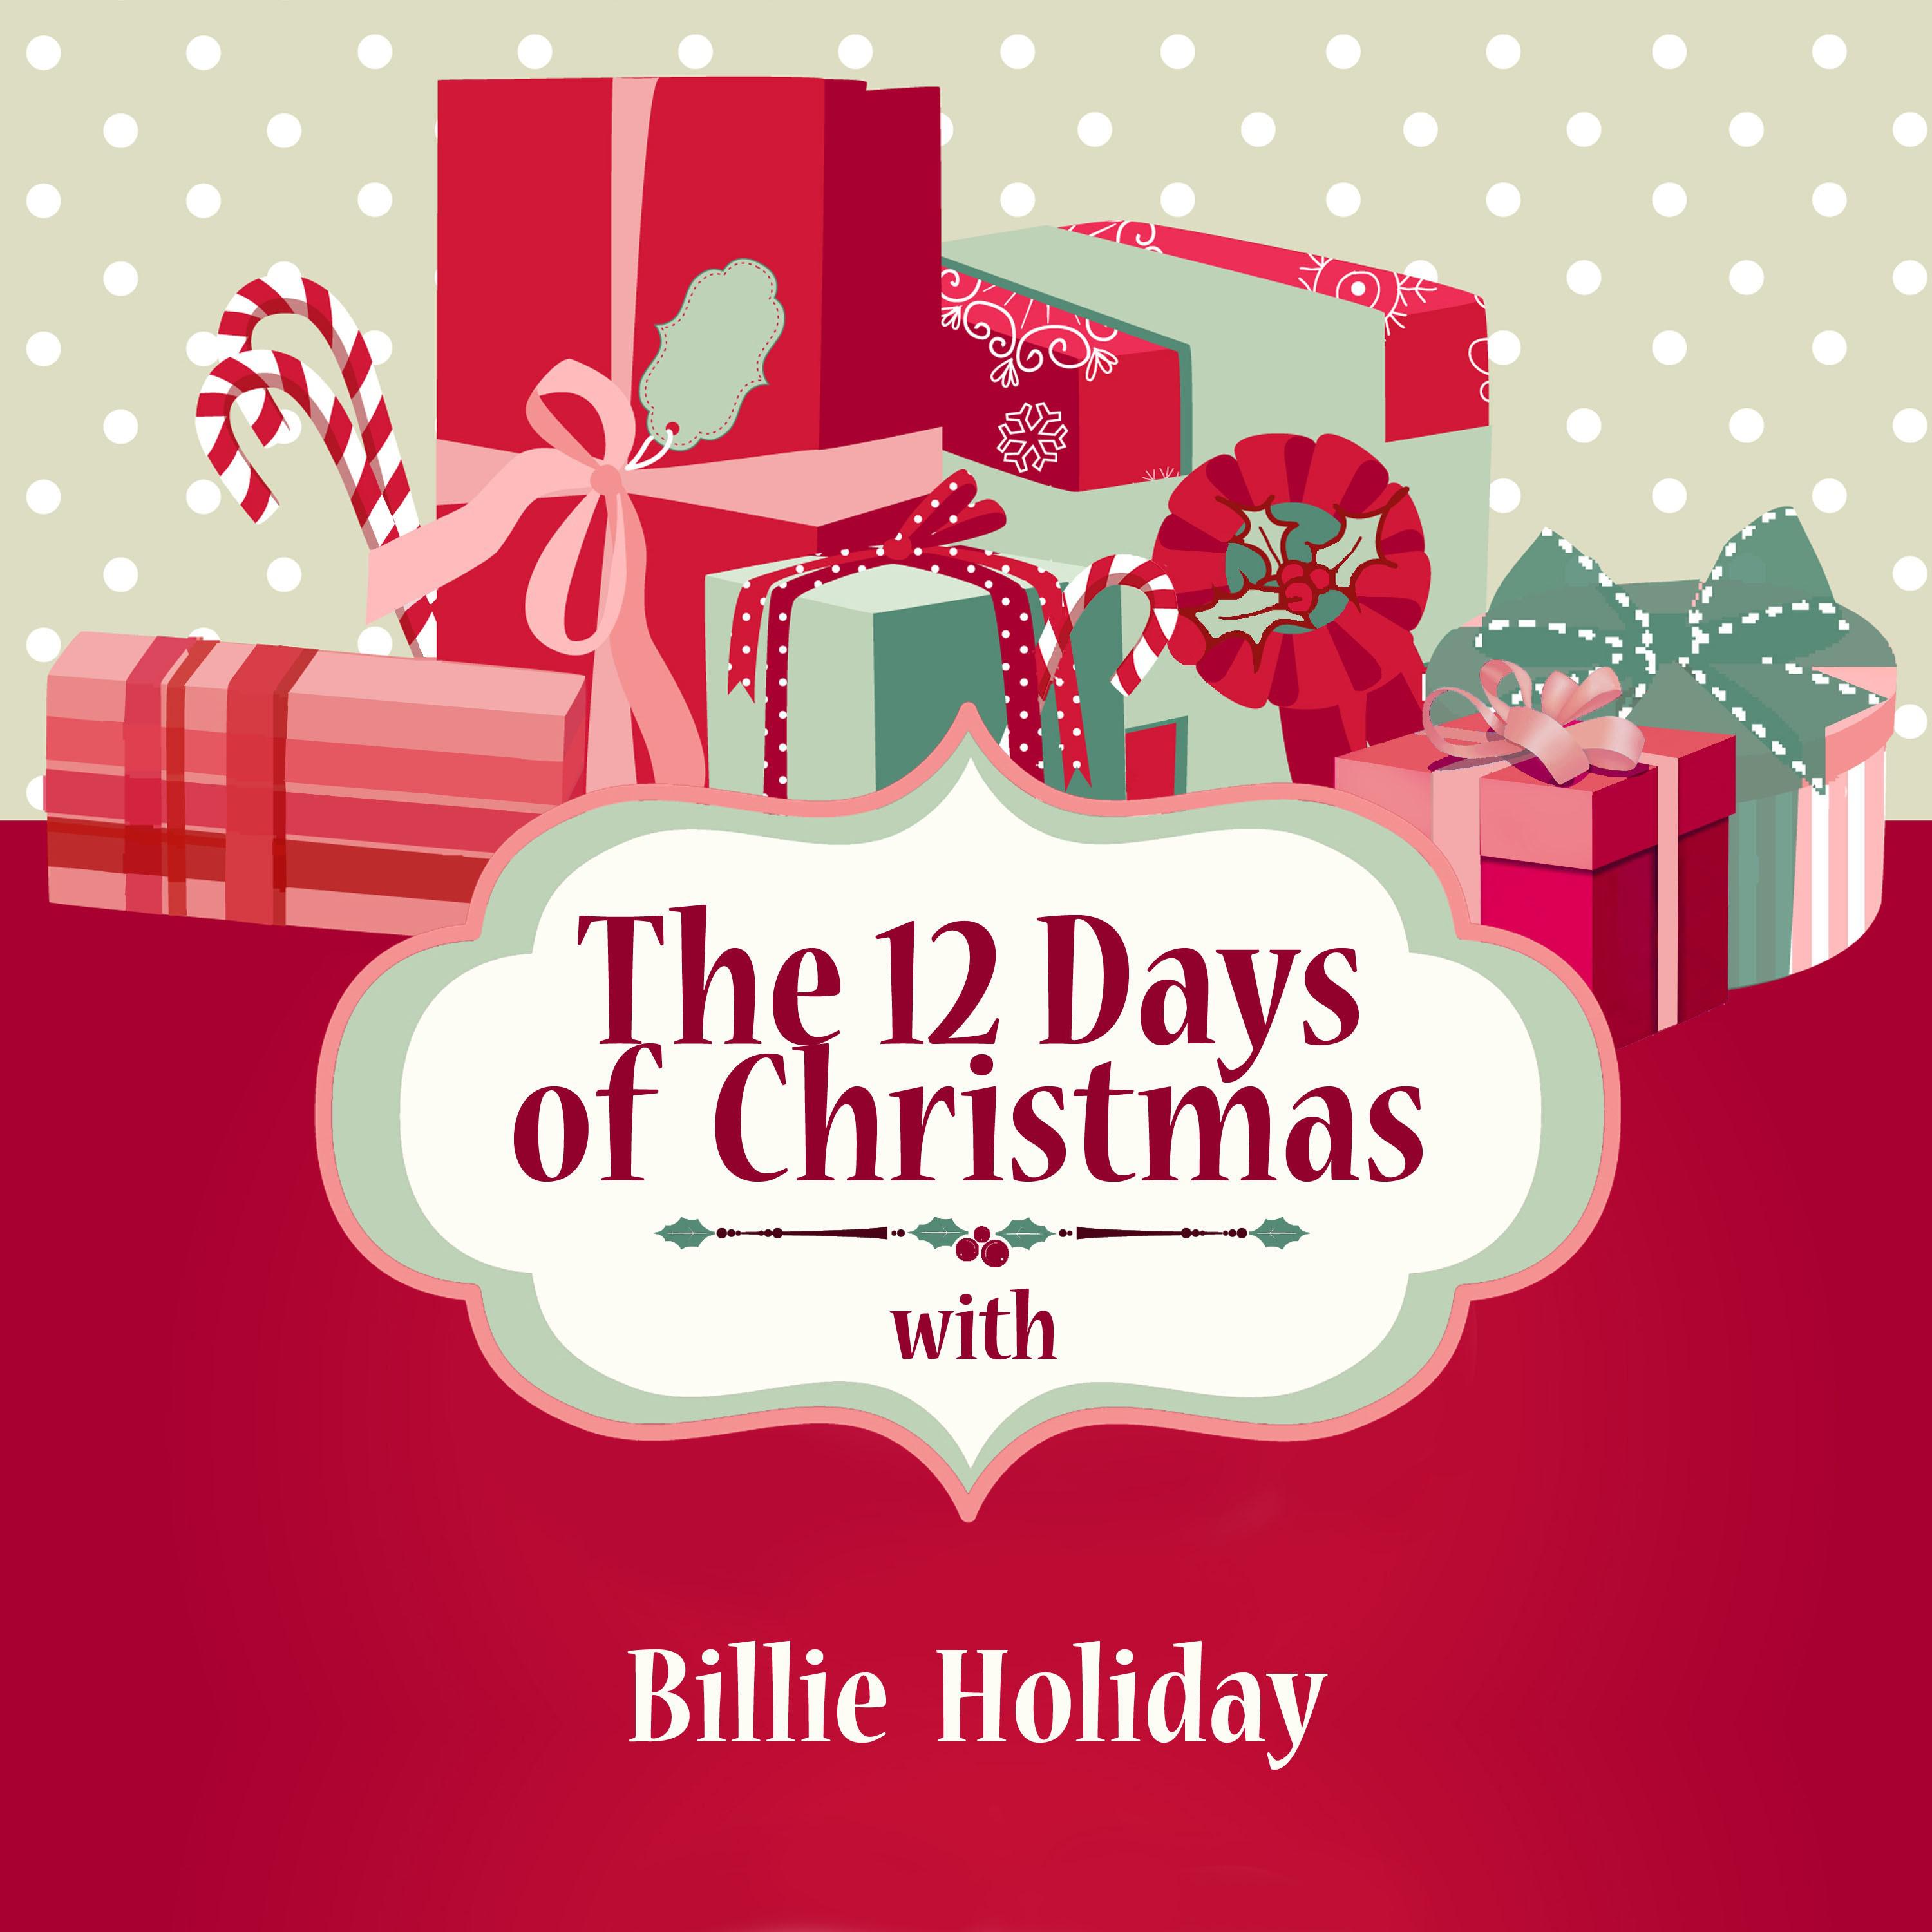 The 12 Days of Christmas with Billie Holiday